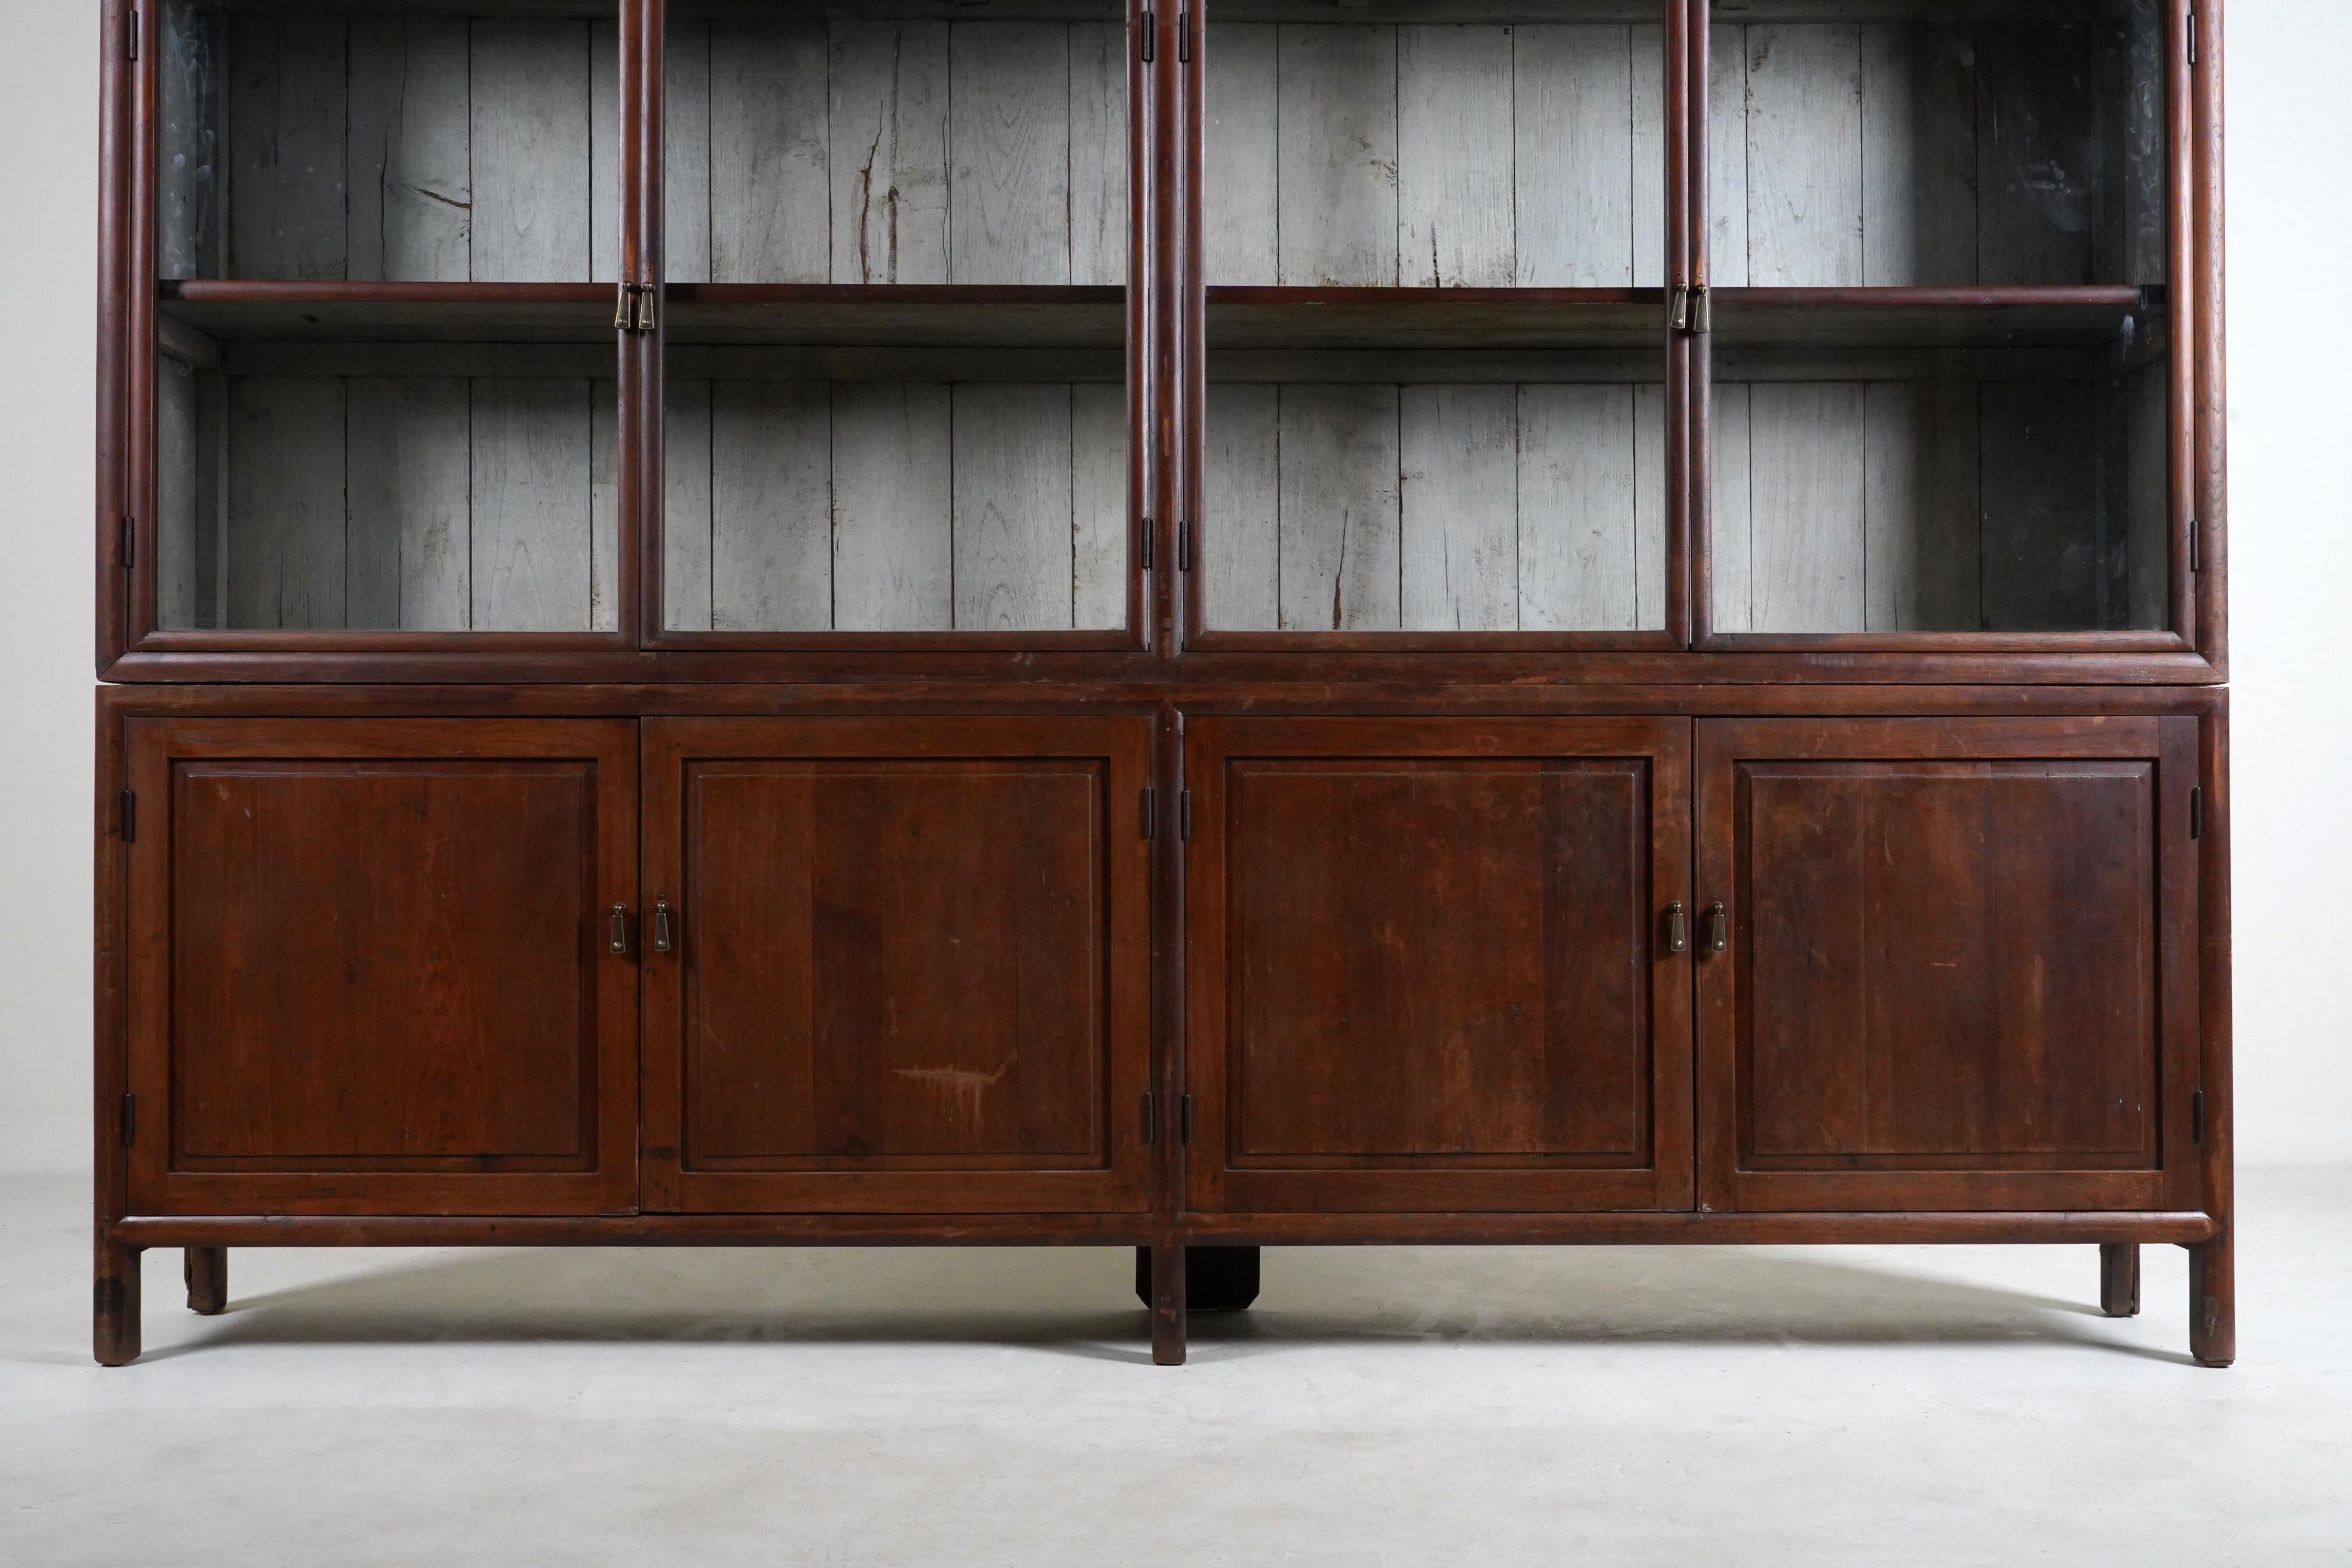 A British Colonial Art Deco Teak Bookcase with Lower Storage  For Sale 1